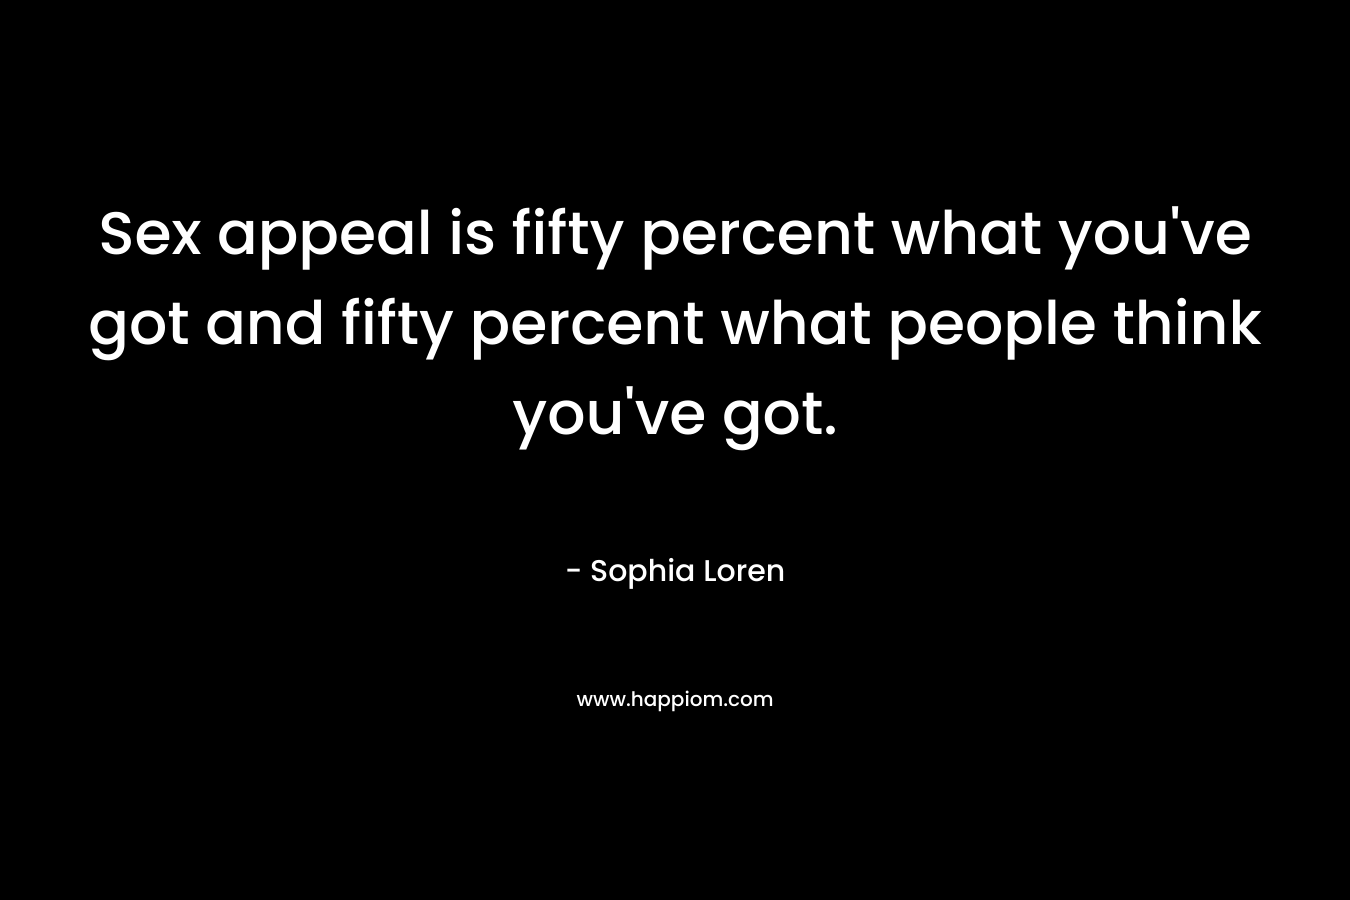 Sex appeal is fifty percent what you’ve got and fifty percent what people think you’ve got. – Sophia Loren